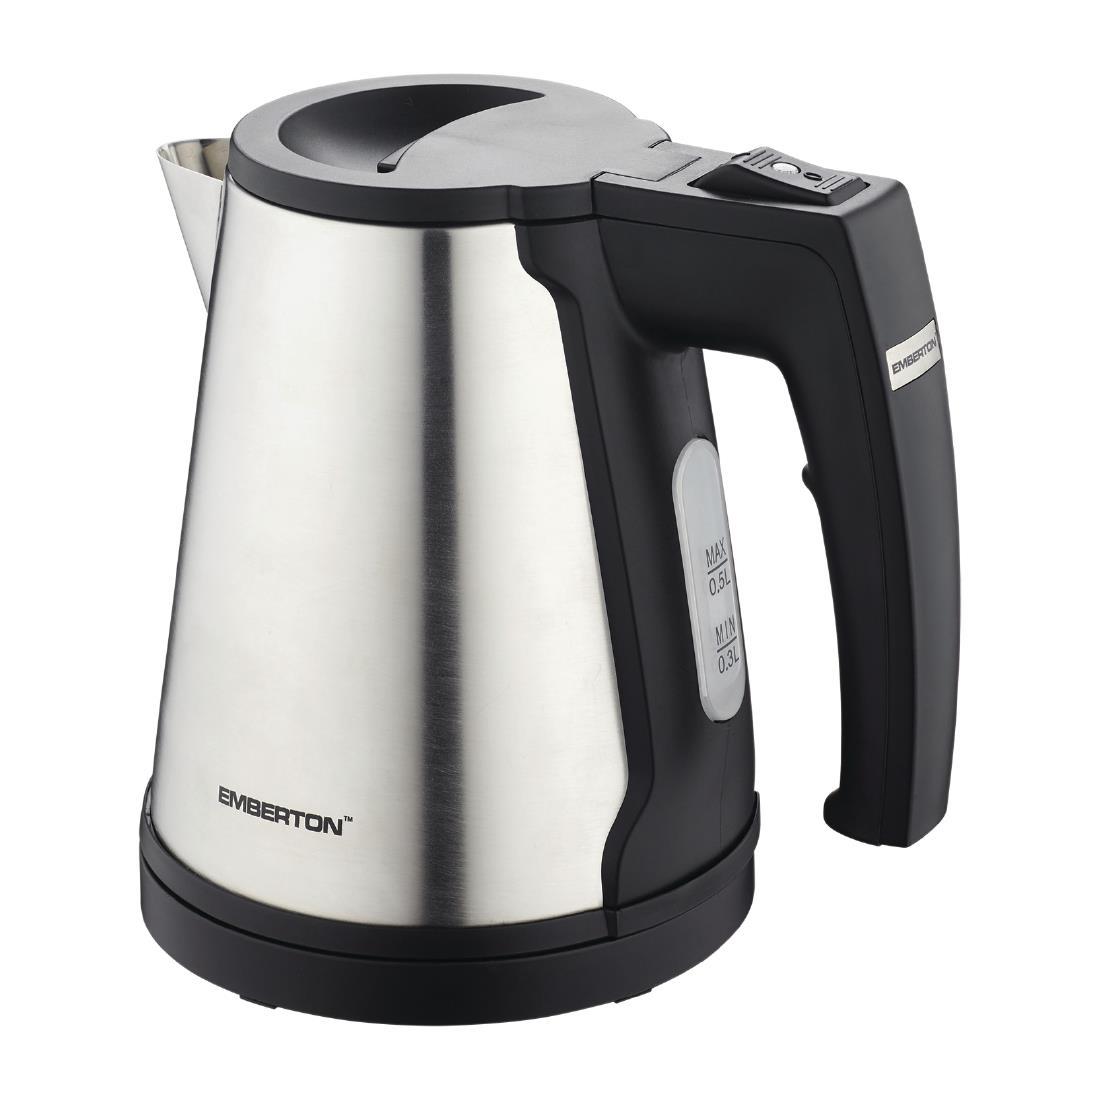 Stainless Steel Kettle 500ml - CL111  - 2